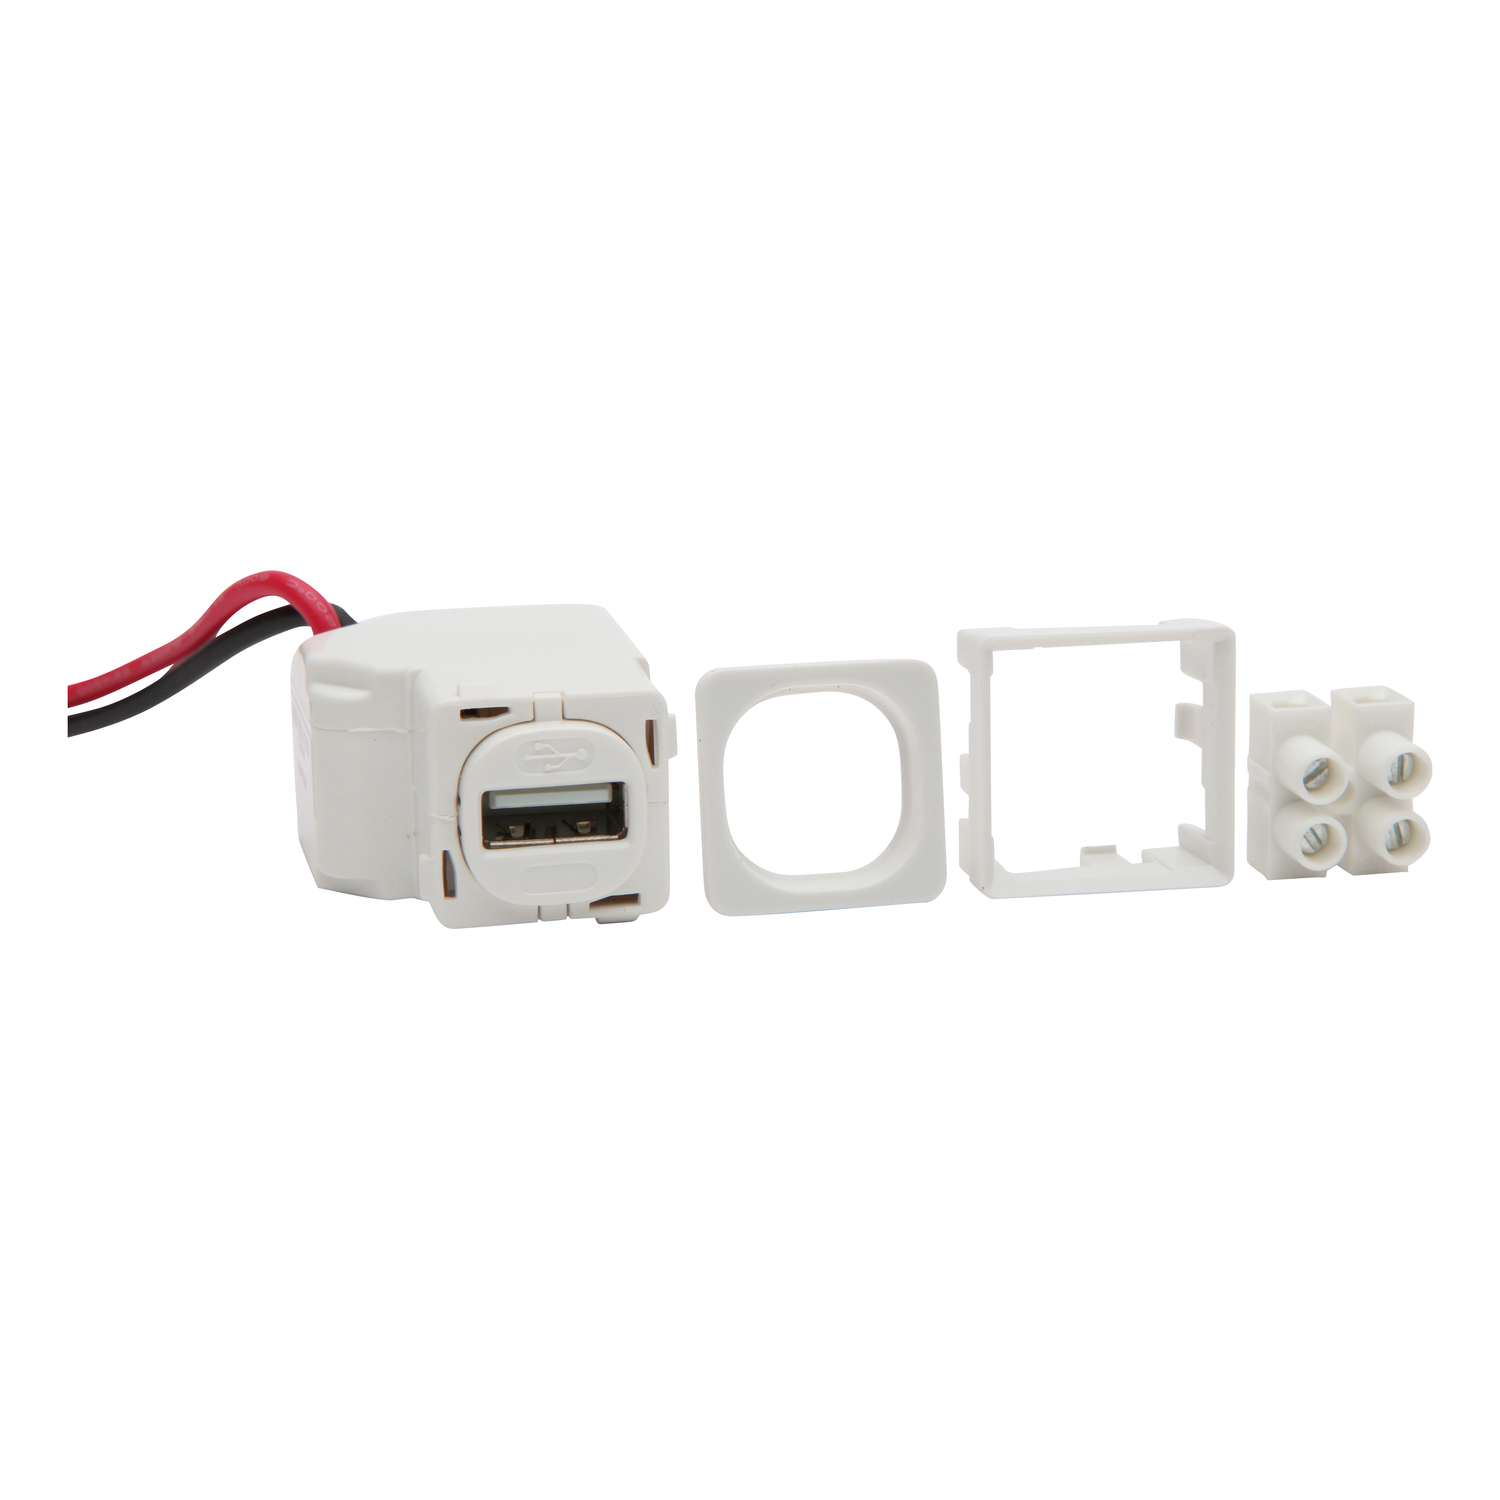 PDL 600 Series - Module USB Charger 1.2A Output 80mA Input - White